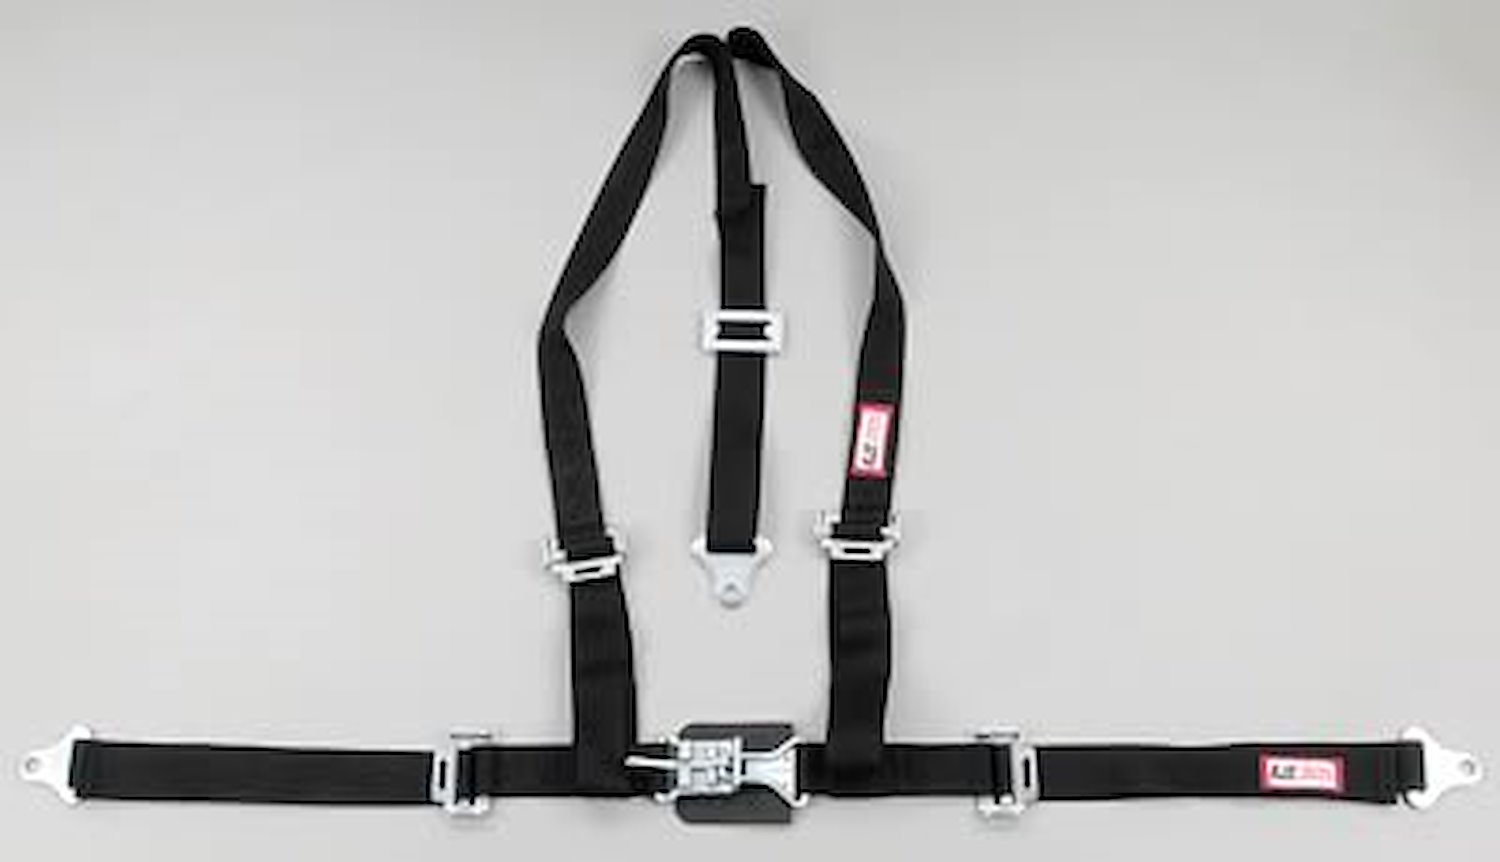 NON-SFI L&L HARNESS 2 PULL UP Lap Belt SNAP SEWN IN 2 S.H. INDIVIDUAL FLOOR Mount w/STERNUM STRAP WRAP/BOLT GRAY